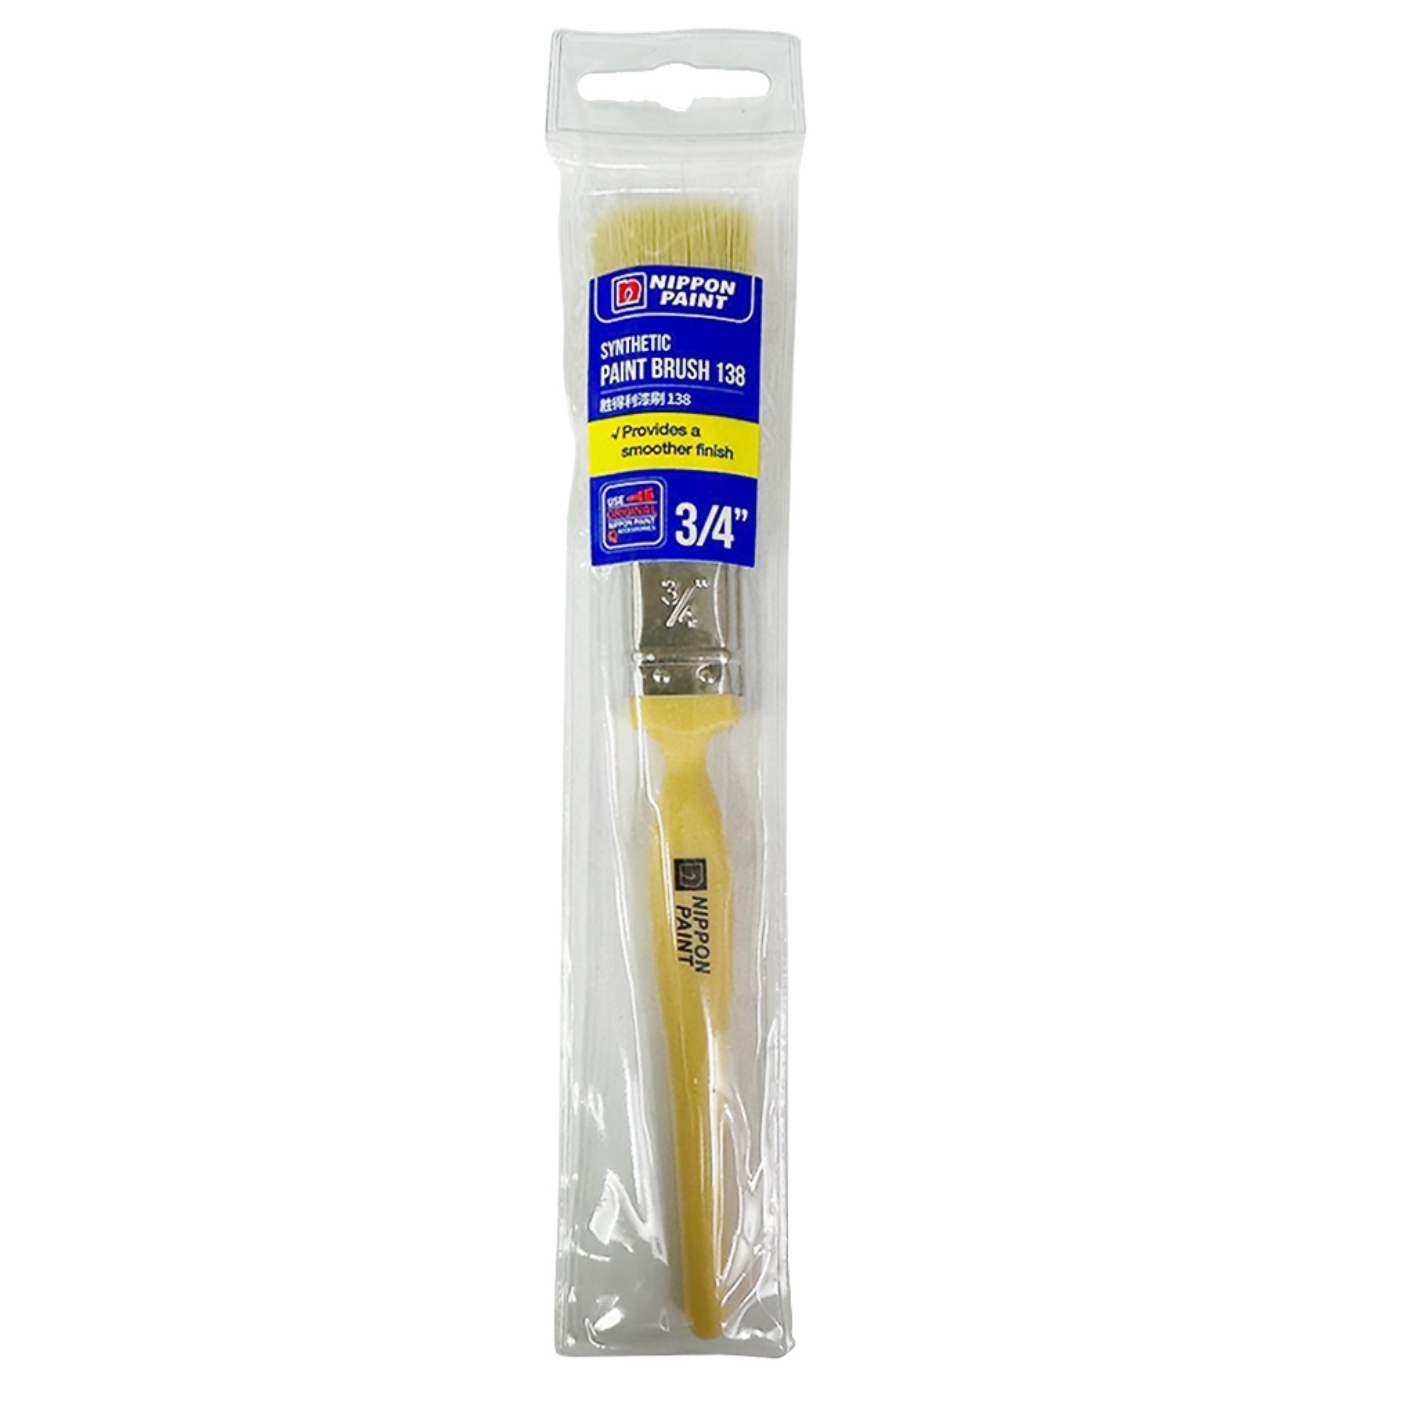 Nippon Paint 3/4" Synthetic Paint Brush 138